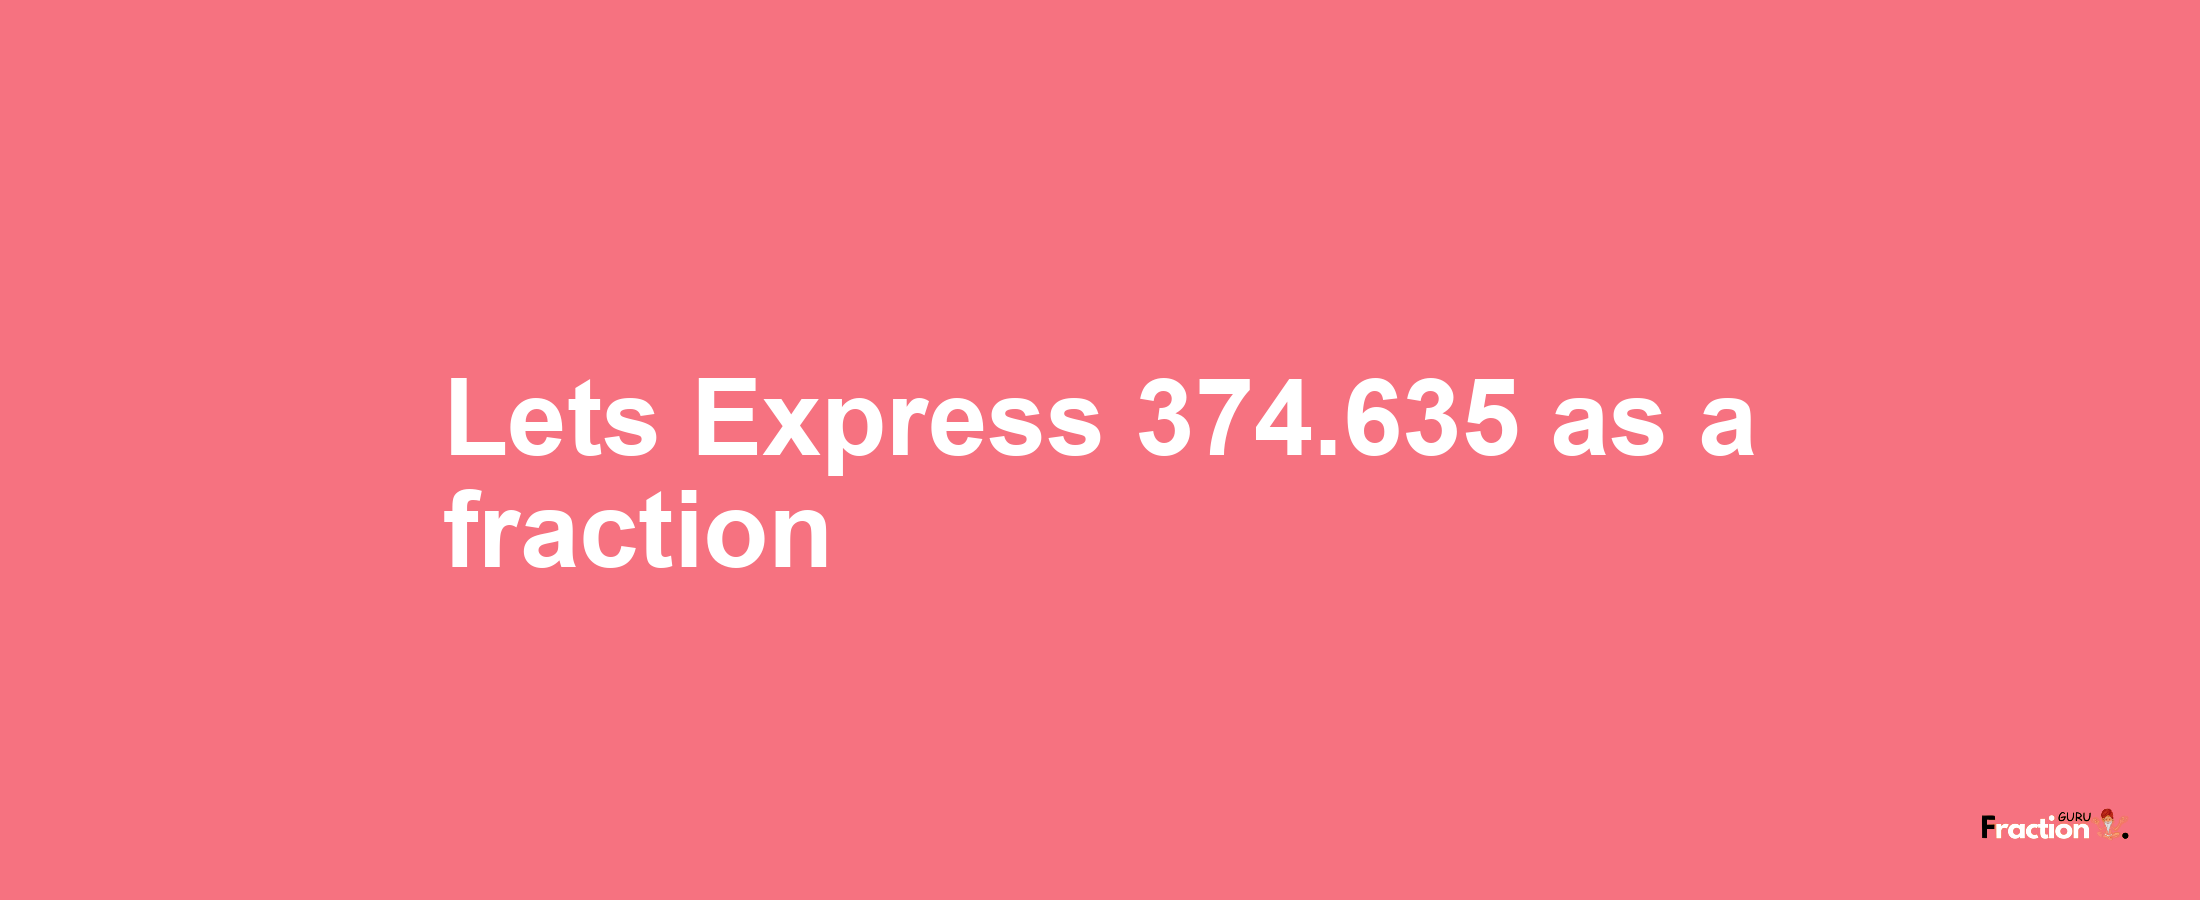 Lets Express 374.635 as afraction